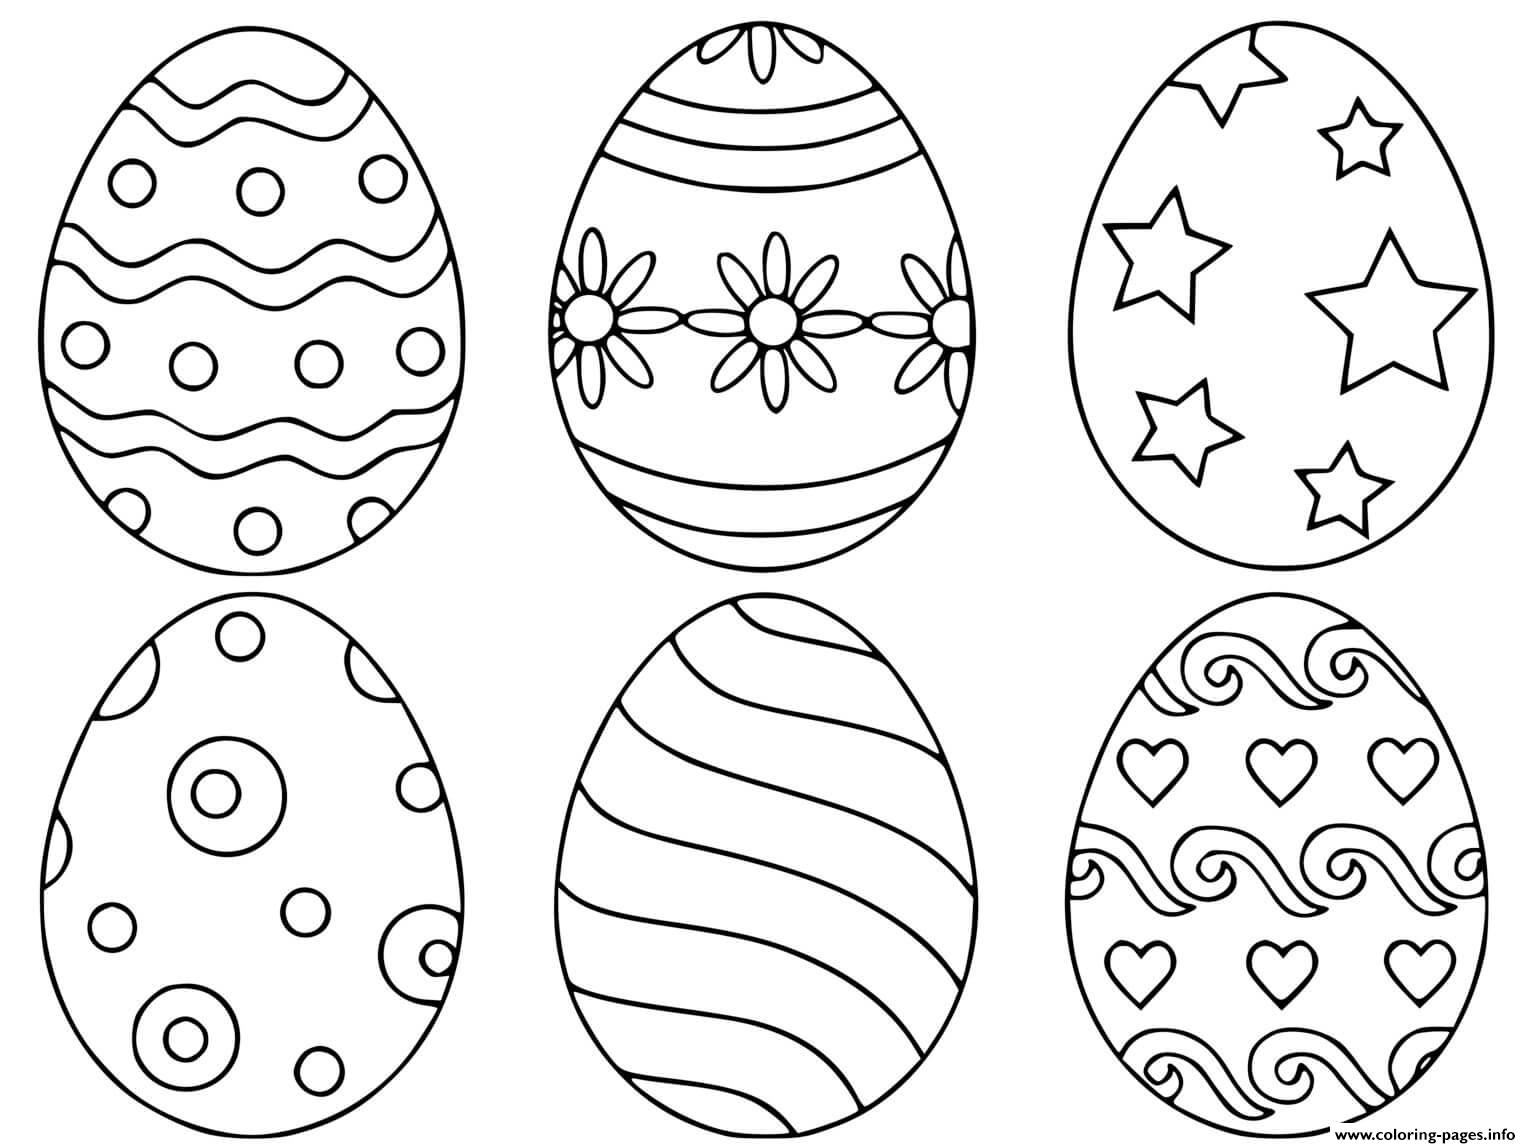 Great Easter Eggs To Color coloring